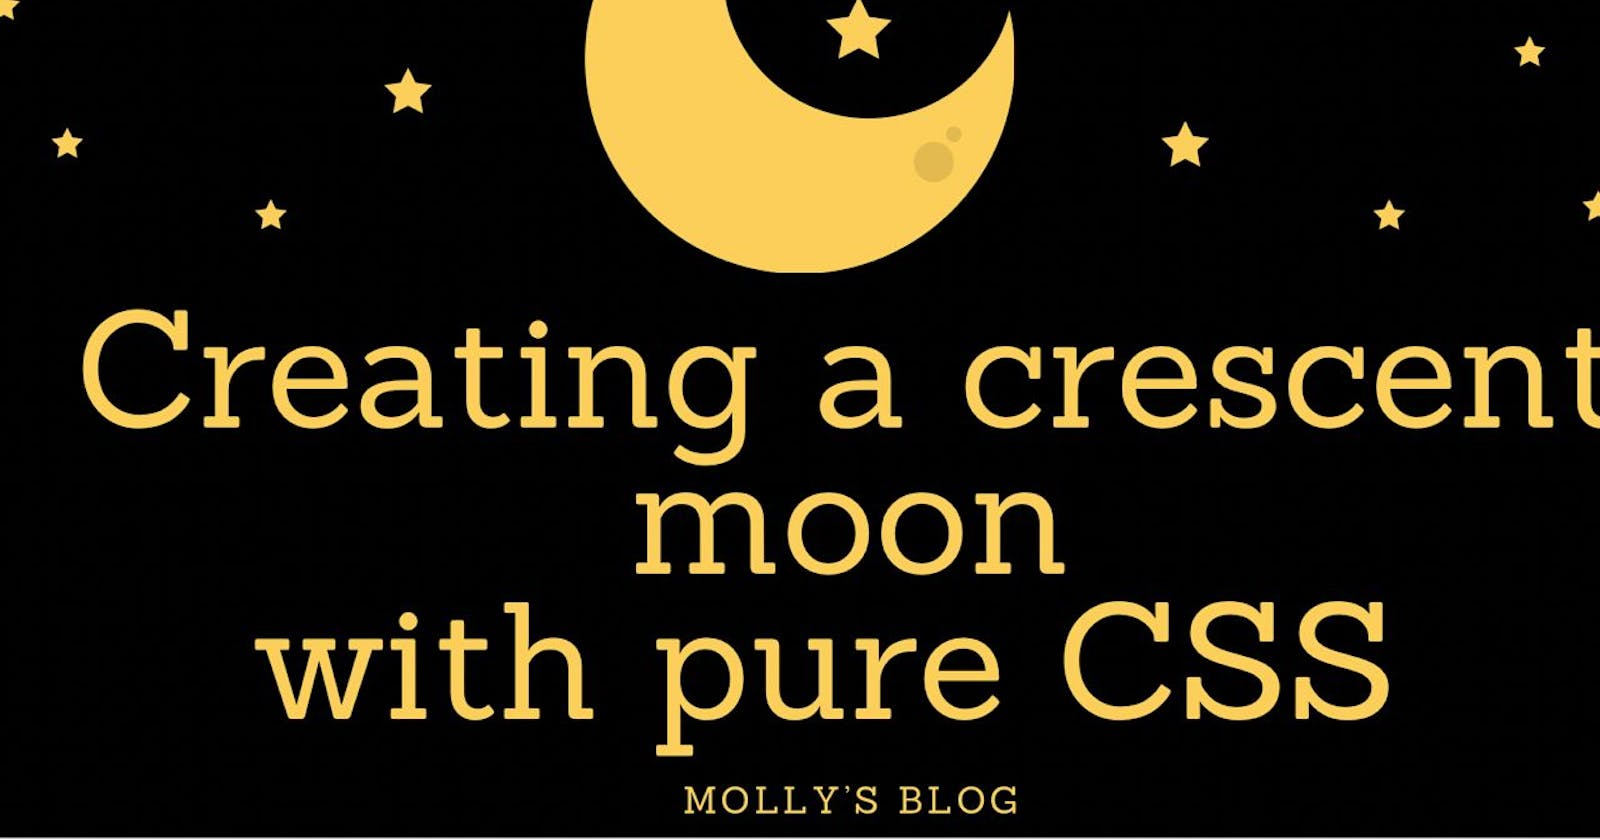 Creating a crescent moon with pure CSS.